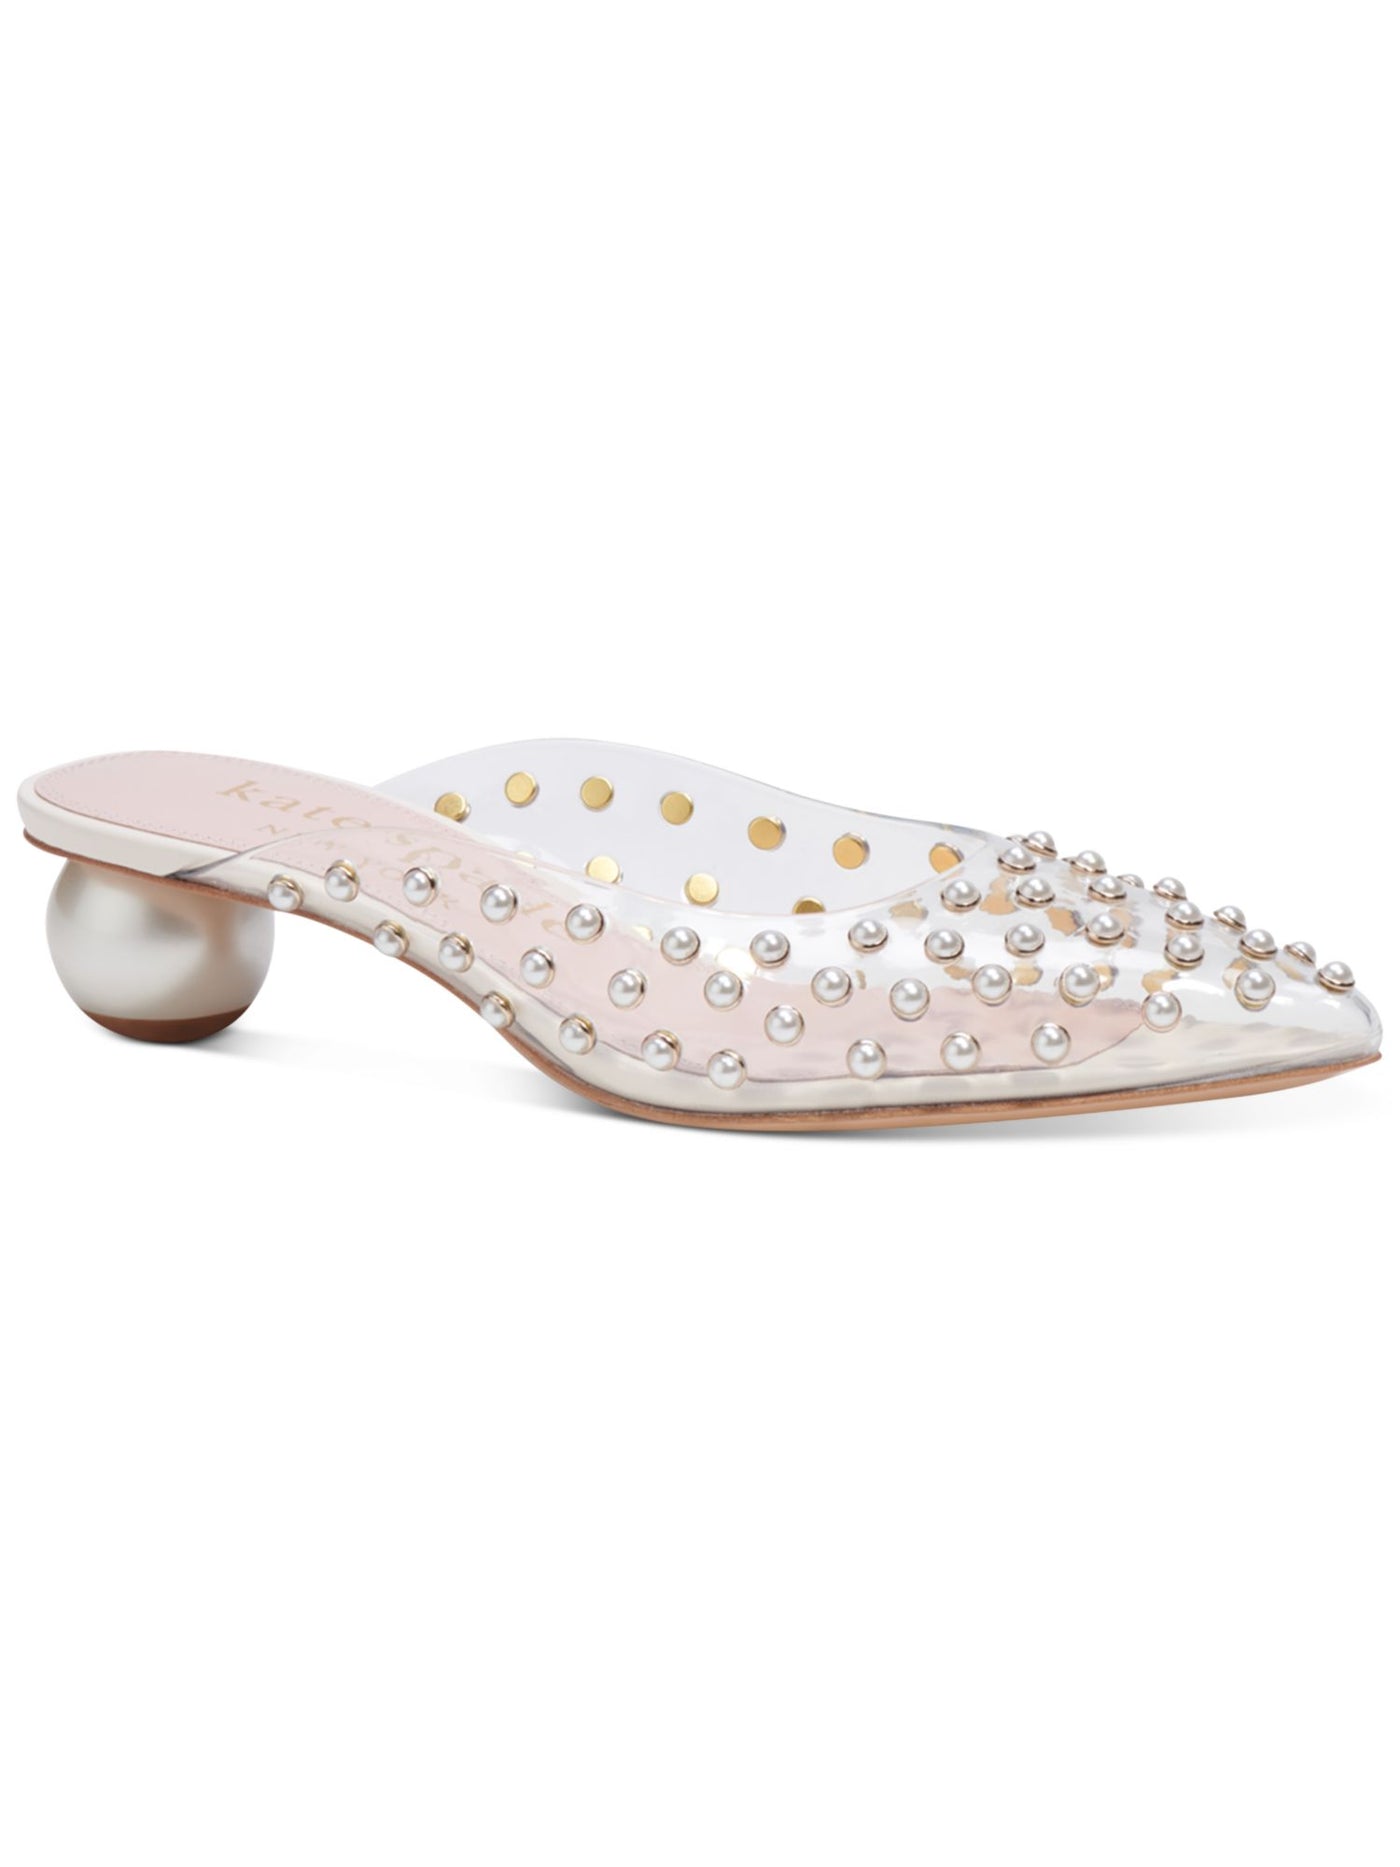 KATE SPADE NEW YORK Womens Clear Embellished Padded Honor Pointed Toe Slip On Flats Shoes 6.5 B